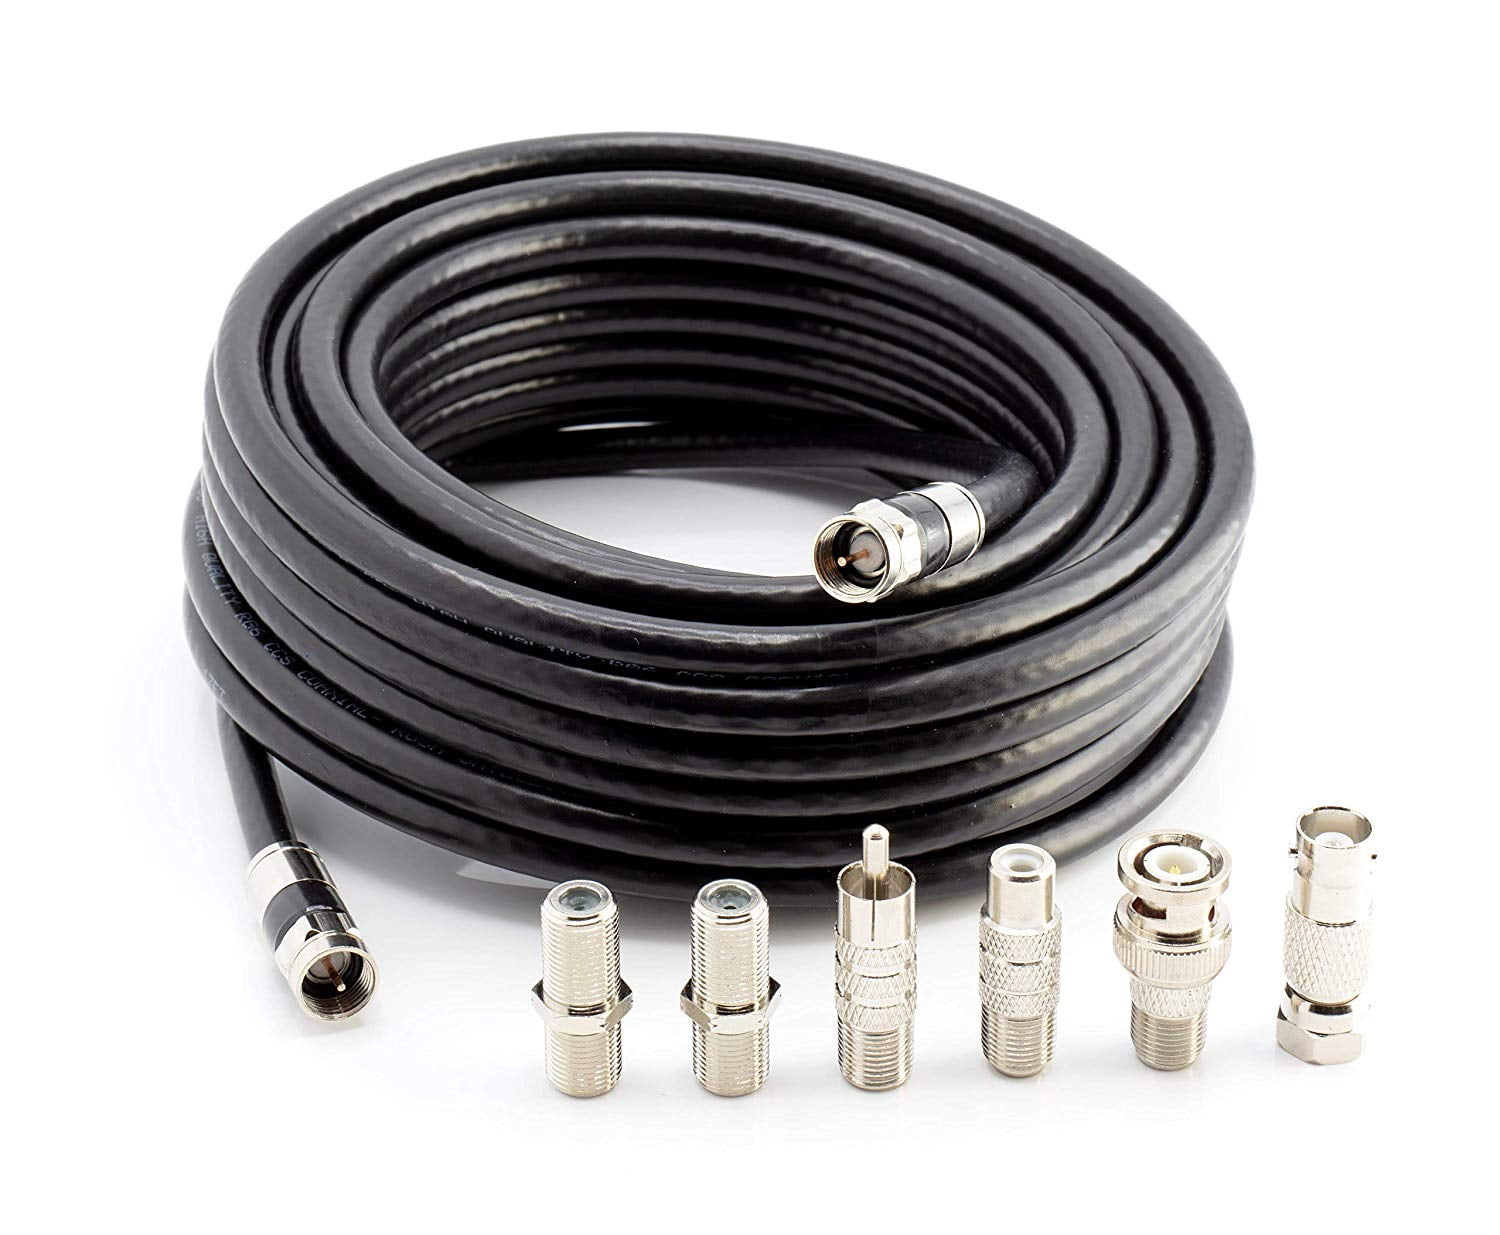 THE CIMPLE CO - Digital Coaxial Cable Kit with Universal Ends -RG6 Coax Cable and six (6) Piece Adapter Kit includes Male Female RCA BNC F81, and Barrel Connectors - Black, 3 Feet